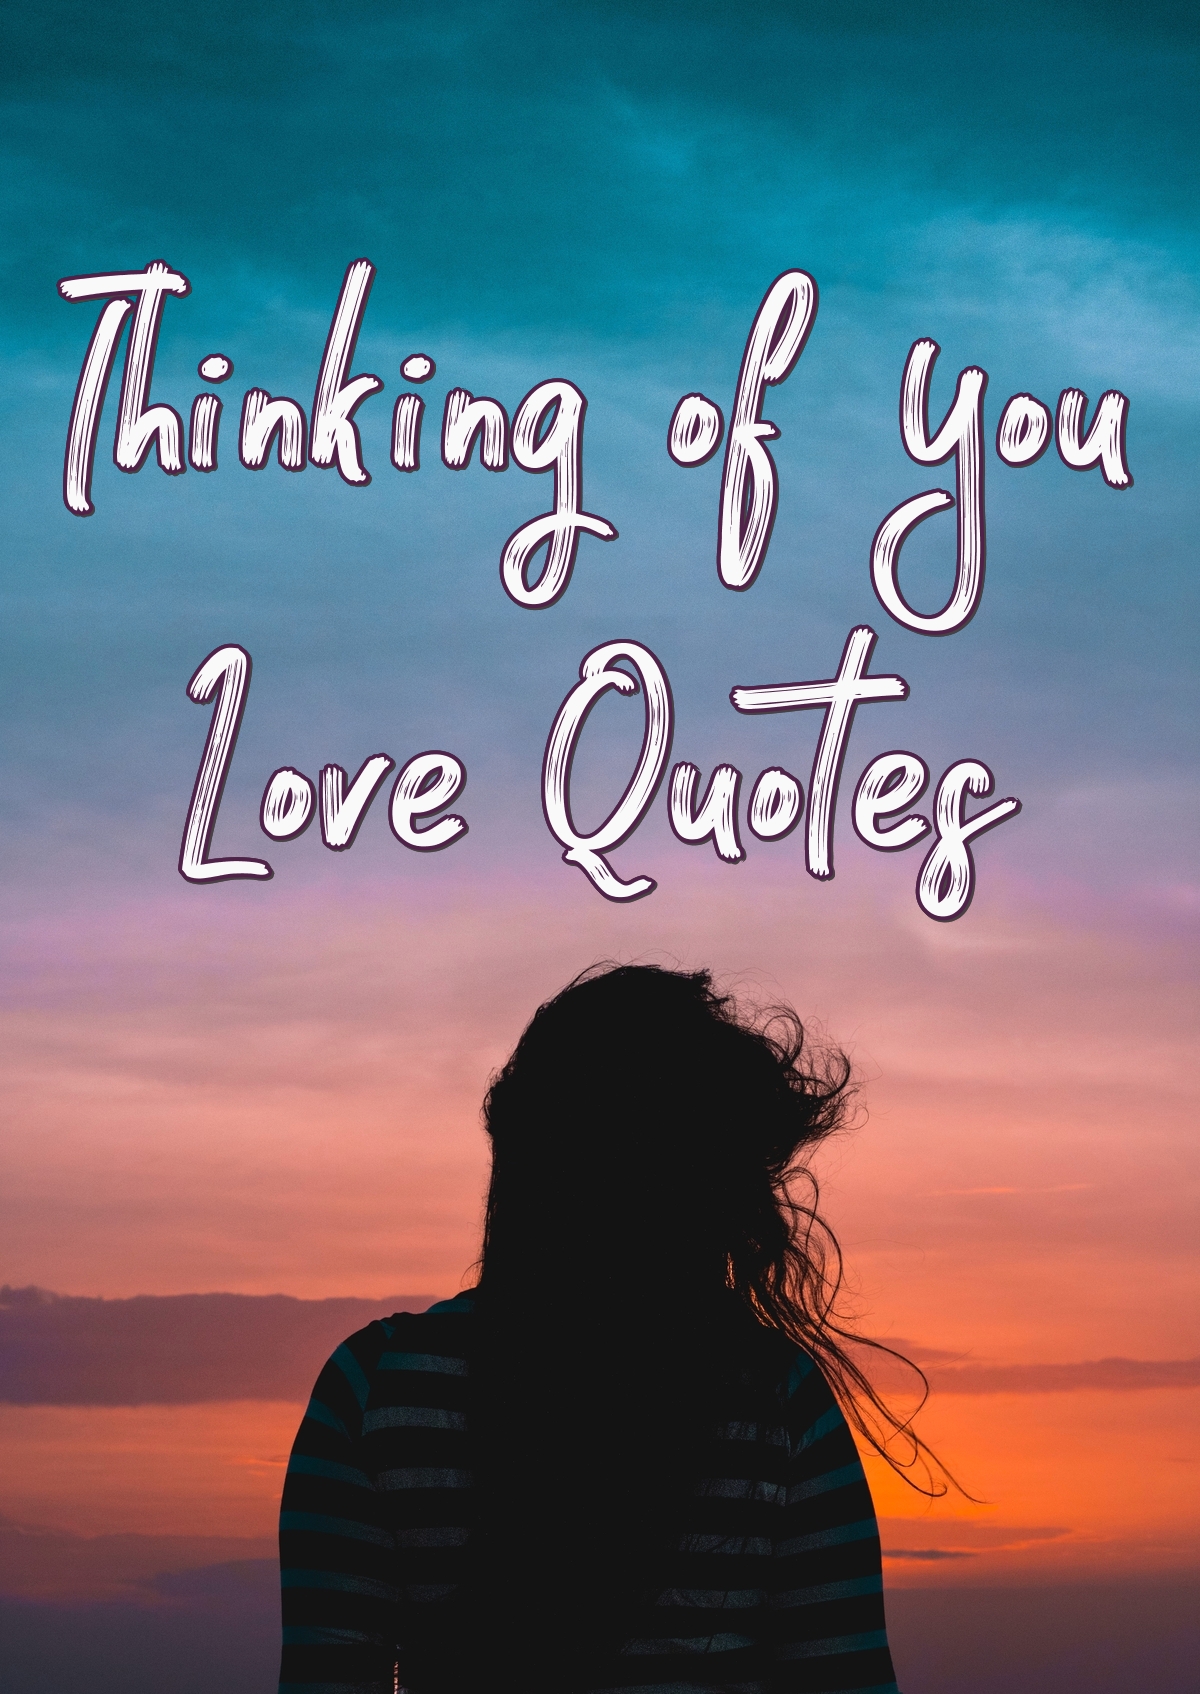 48 Thinking of You Quotes (For Him and Her) | PureLoveQuotes